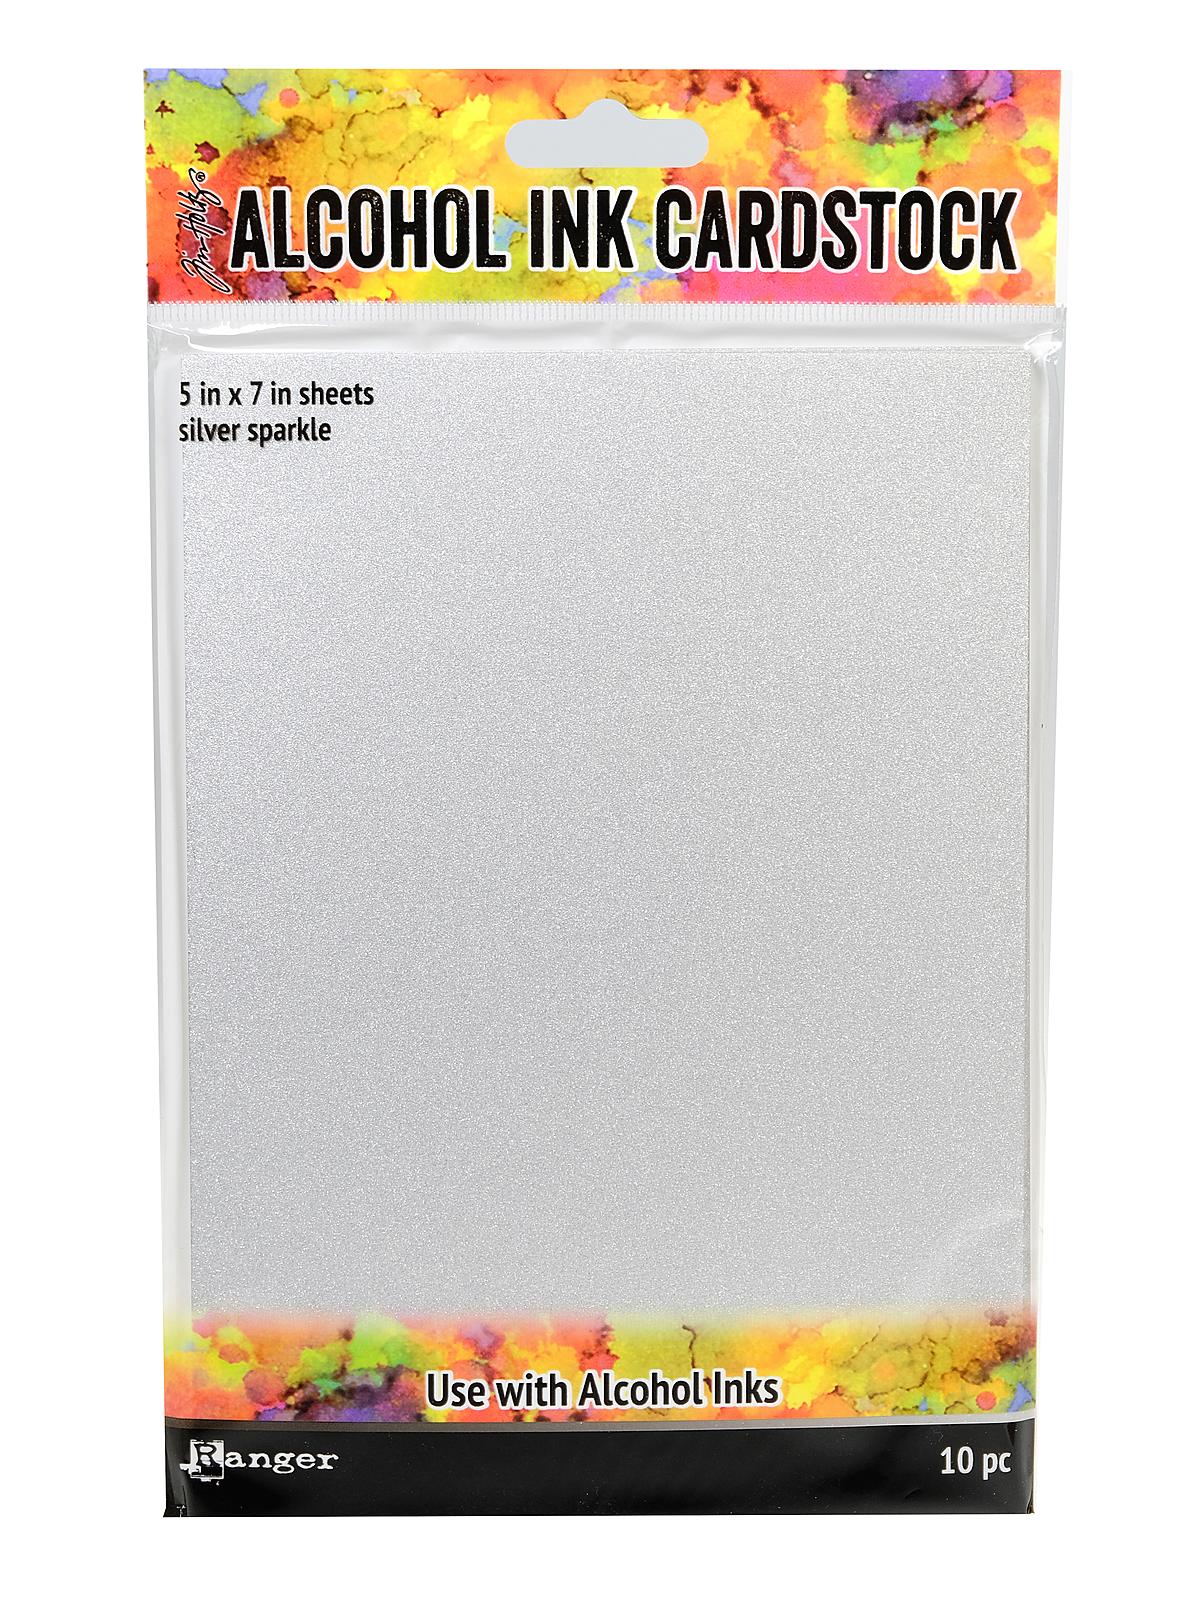 Tim Holtz Alcohol Ink Cardstock Silver Sparkle 5 In. X 7 In. Pack Of 10 Sheets